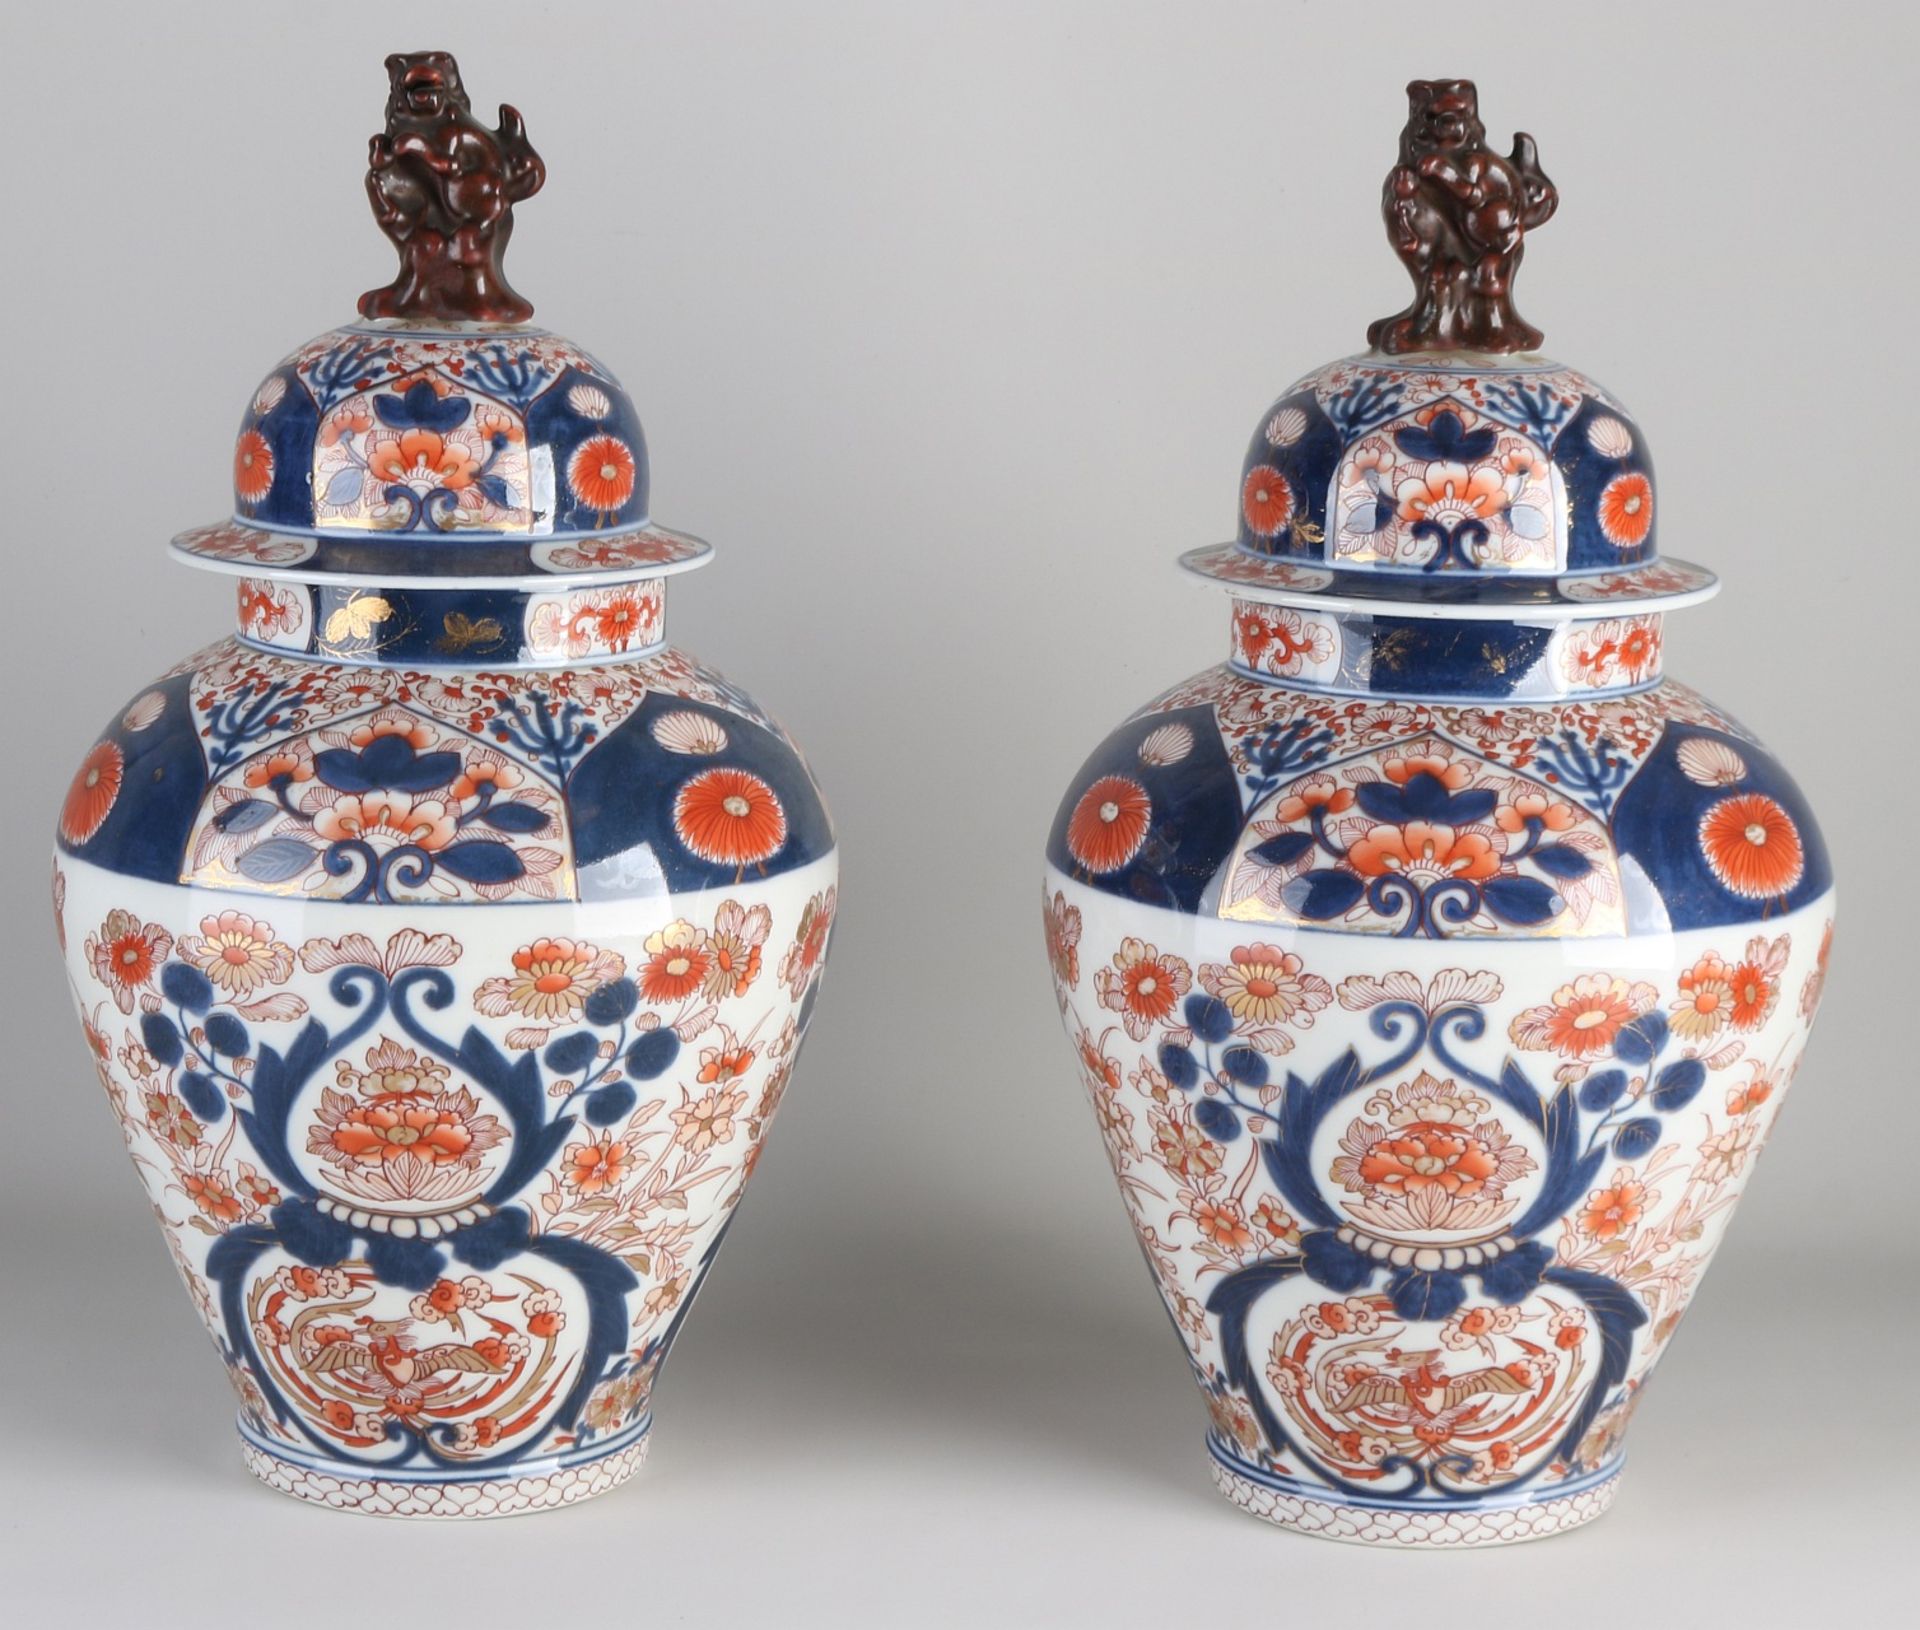 Two beautiful Japanese Imari vases with lid, H 42 cm.